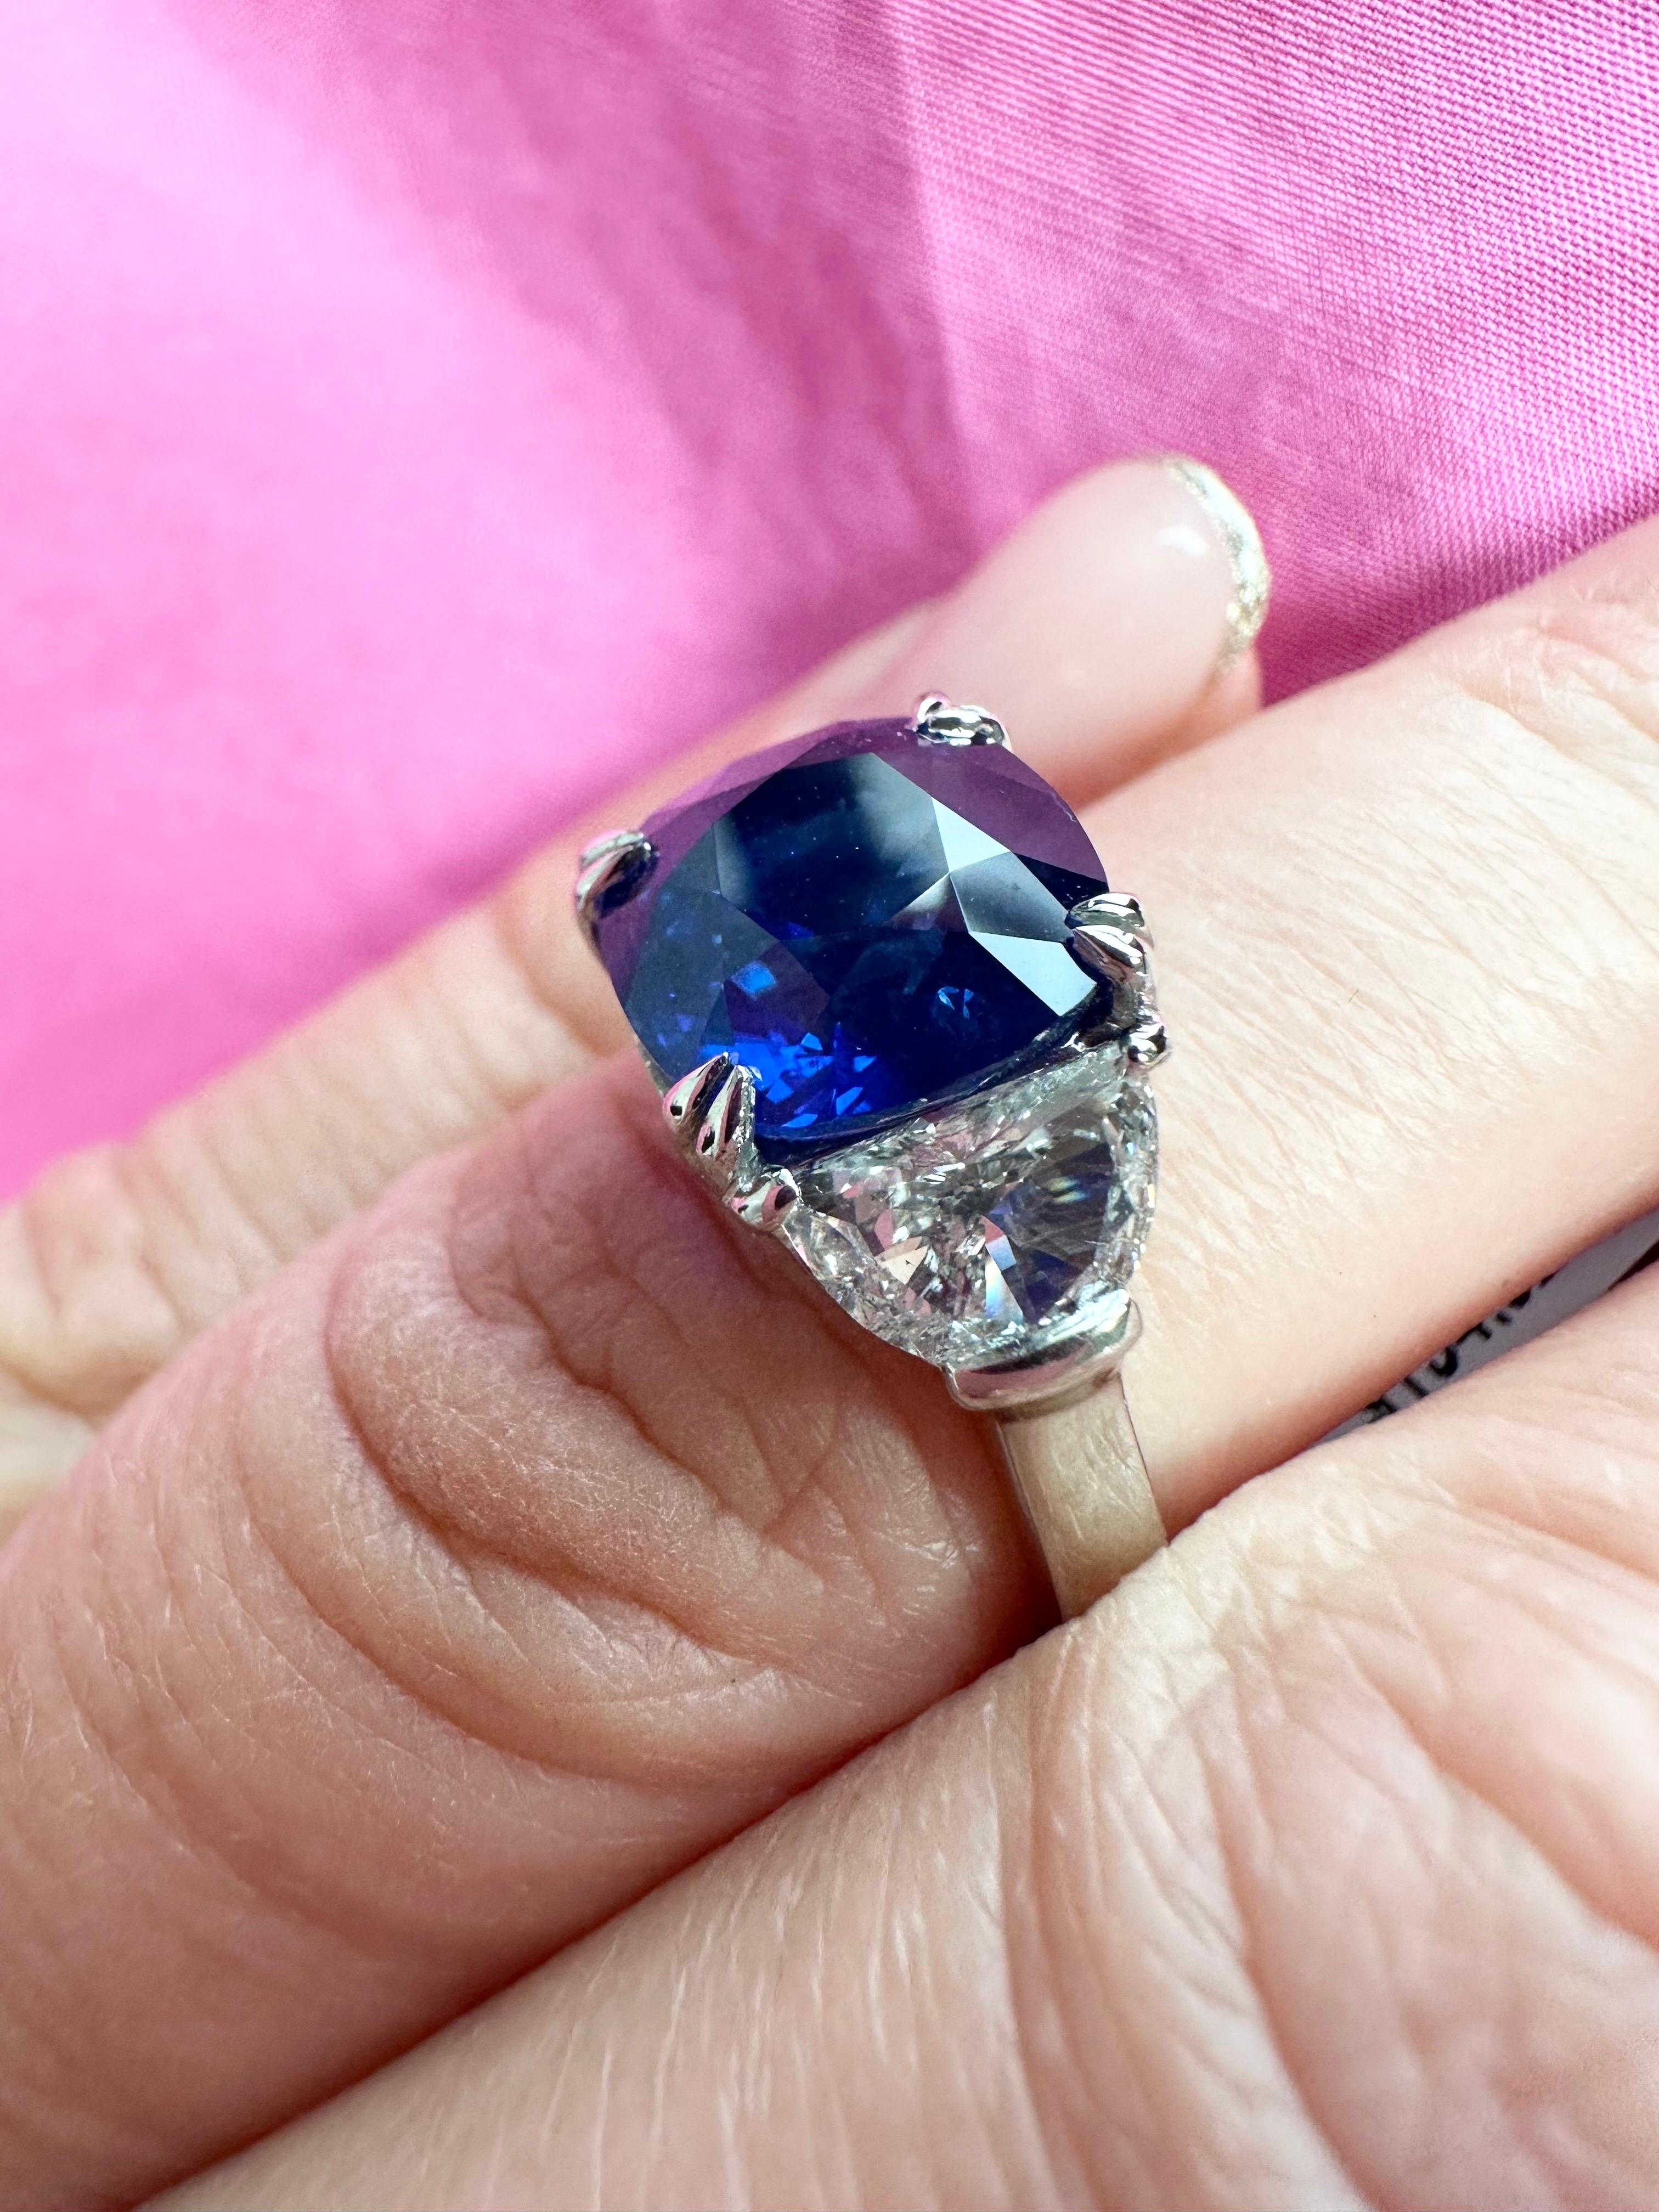 Rare Sapphire Diamond ring in platinum, made with two half moon diamonds with mesmorizing sapphire color center!

METAL: PLATINUM
NATURAL SAPPHIRE:
Carat:4.94ct
Cut: Cushion
Clarity: Slightly Included
Color: Blue

NATURAL DIAMOND(S):
Clarity/Color: